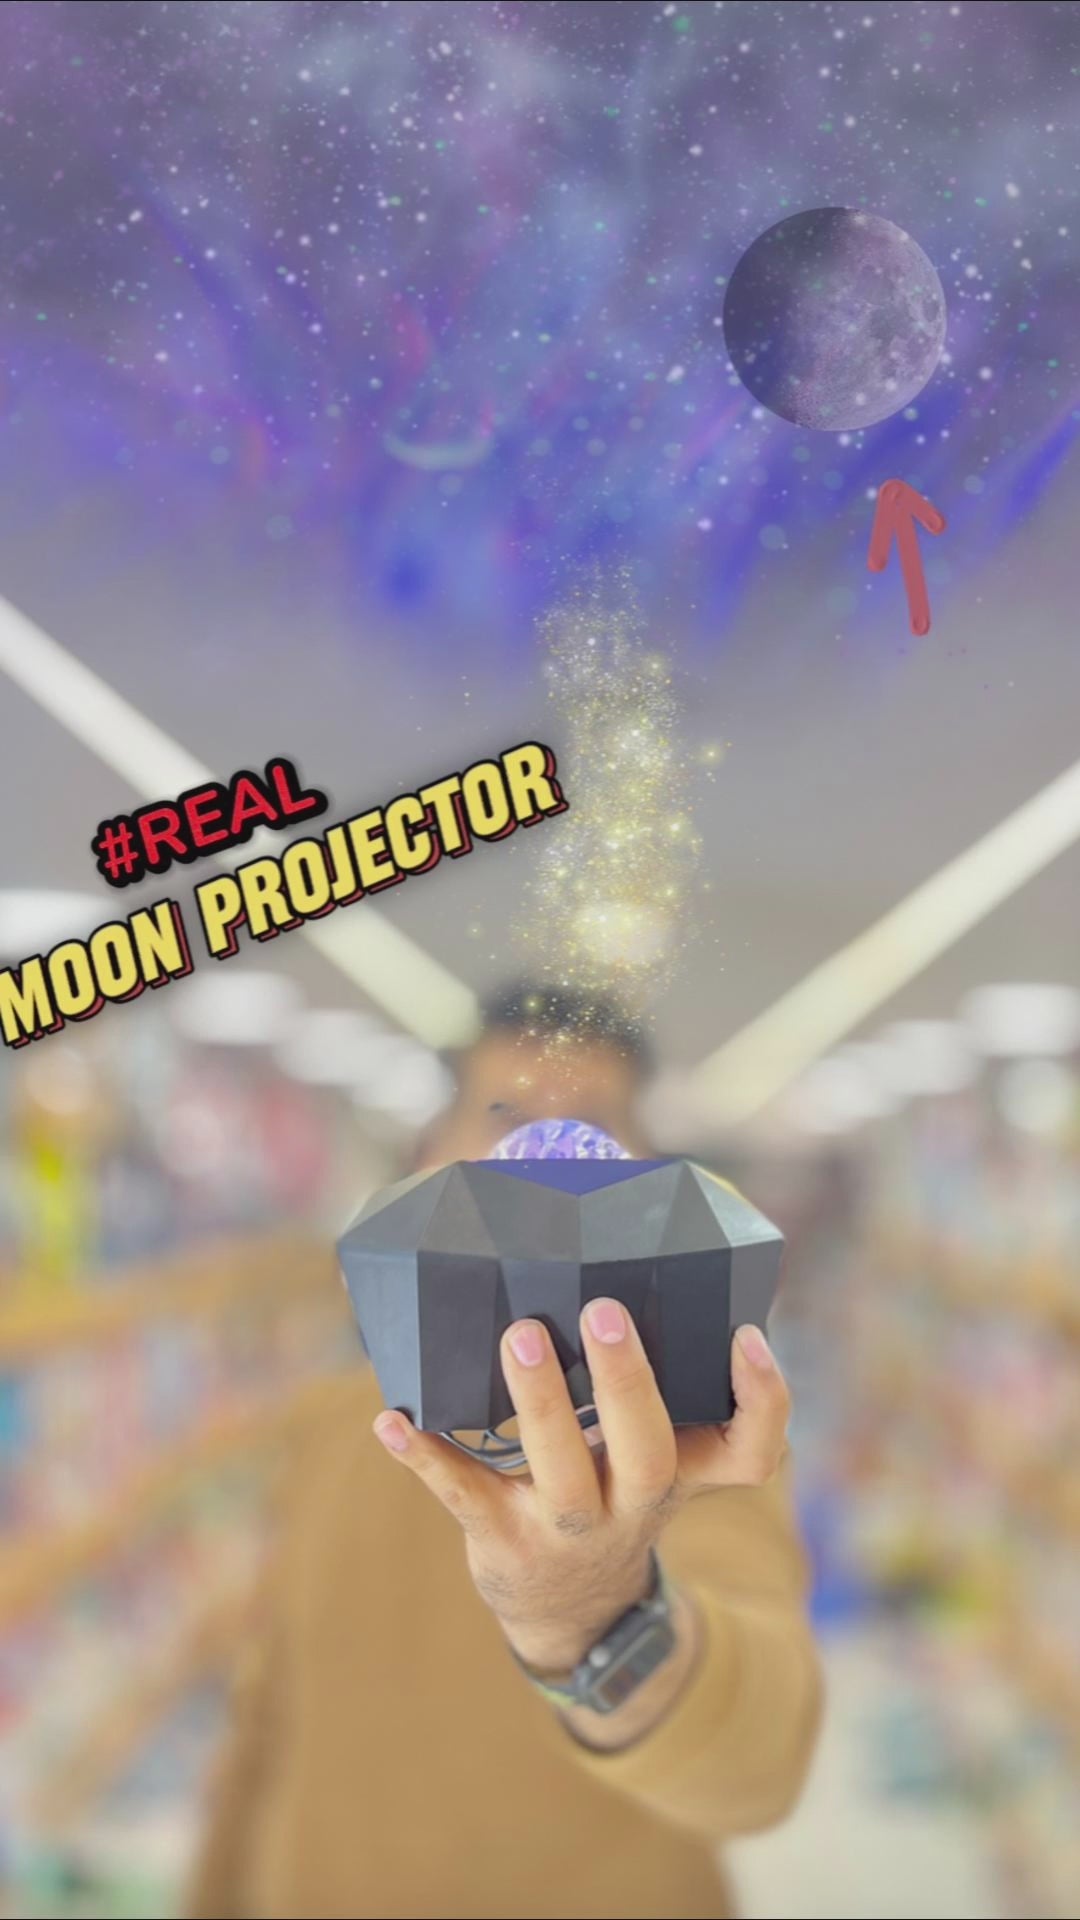 Aurora Lights Star Moon Projector with Remote Control & Bluetooth Music Speaker - Latest Moon projector - Playmaster toys video